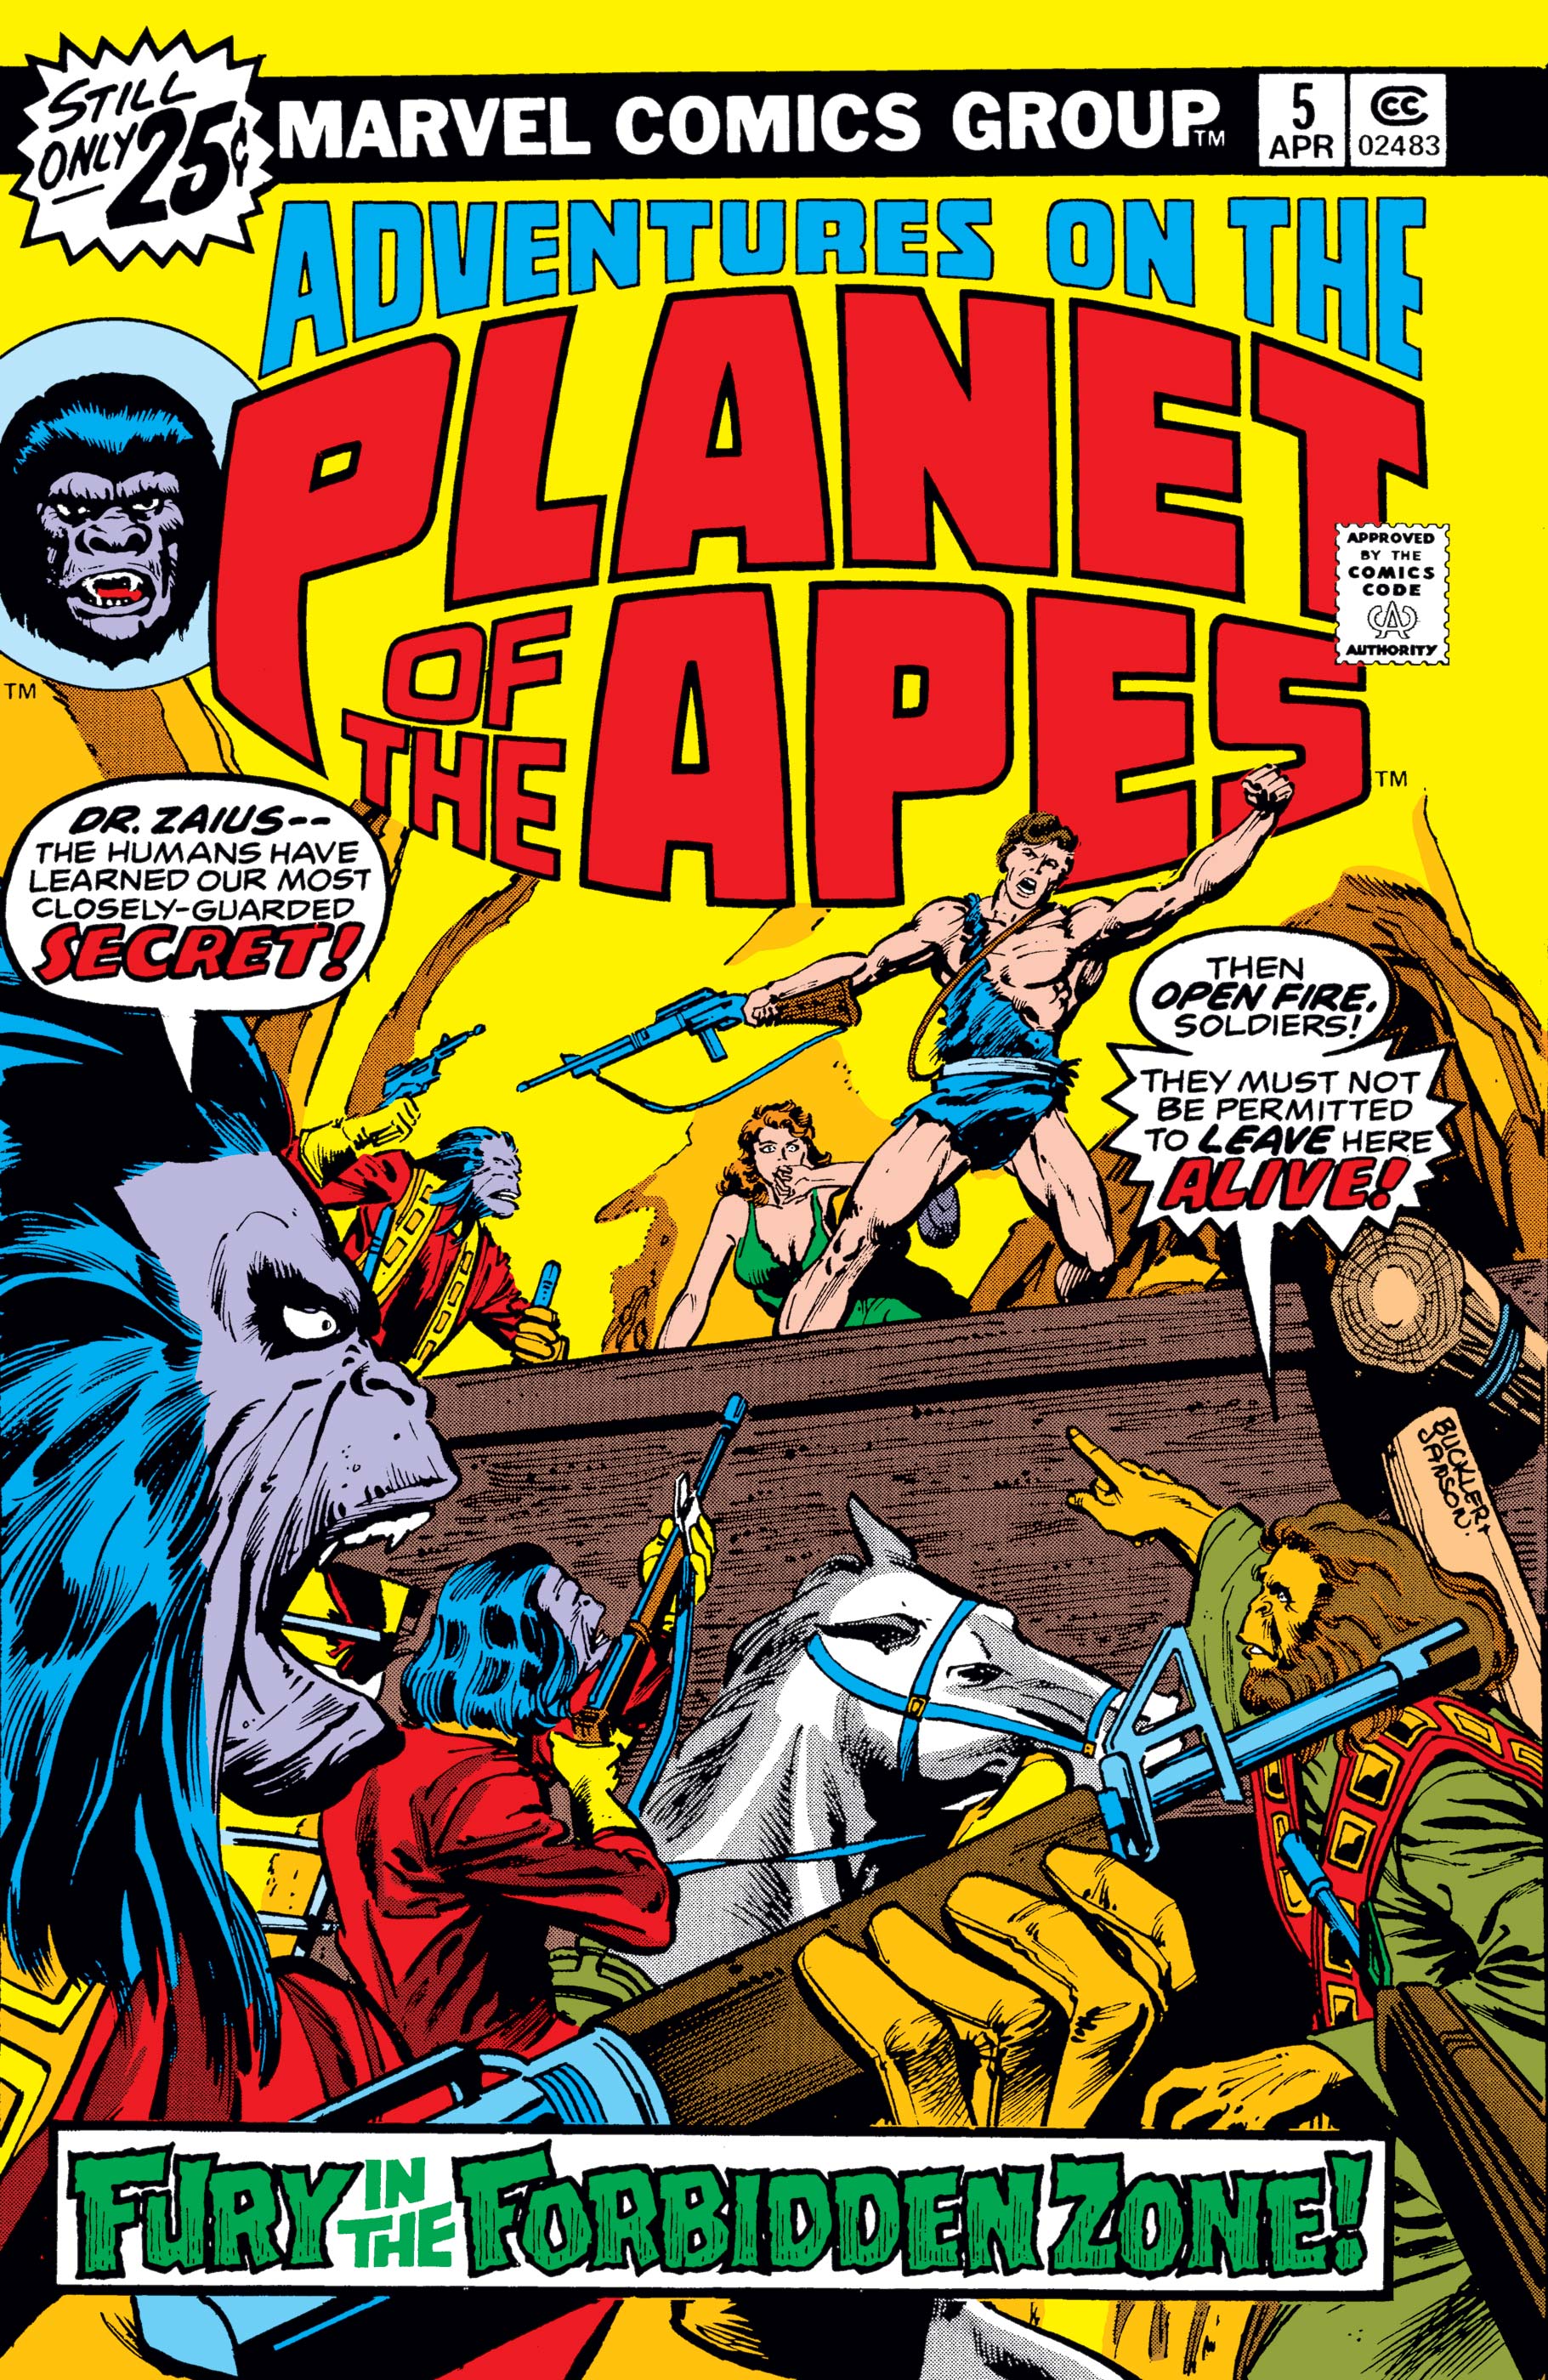 Adventures on the Planet of the Apes (1975) #5